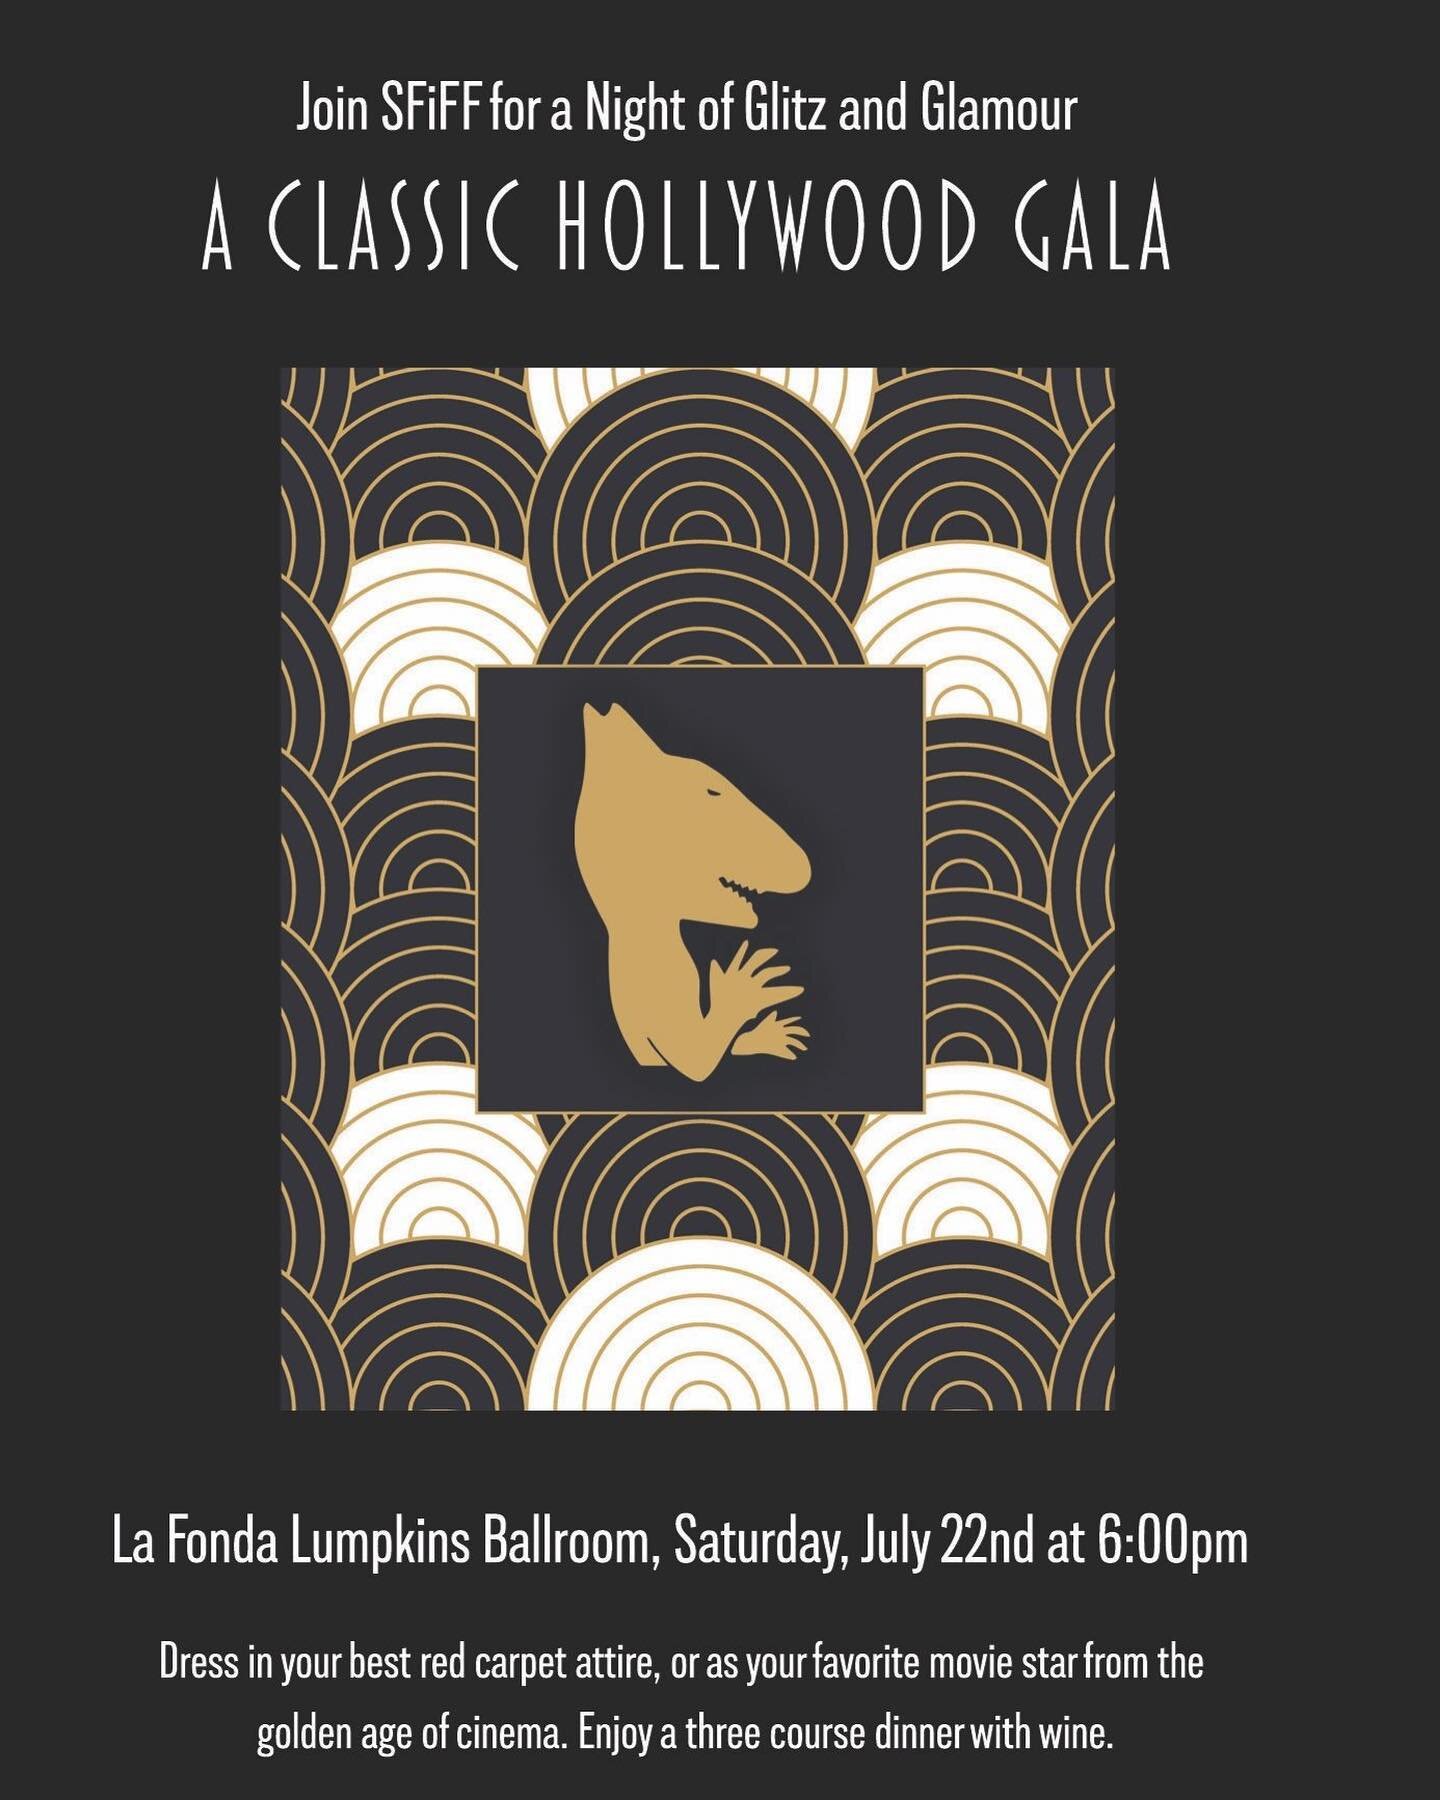 Get your tickets here: https://santafe.film/2023-gala
Santa Fe International Film Festival&rsquo;s 15th Anniversary Summer Gala: A Night of Glitz and Glamour &quot;A Classic Hollywood Gala&quot; on July 22nd at 6pm at La Fonda's Lumpkins Ballroom. Fu